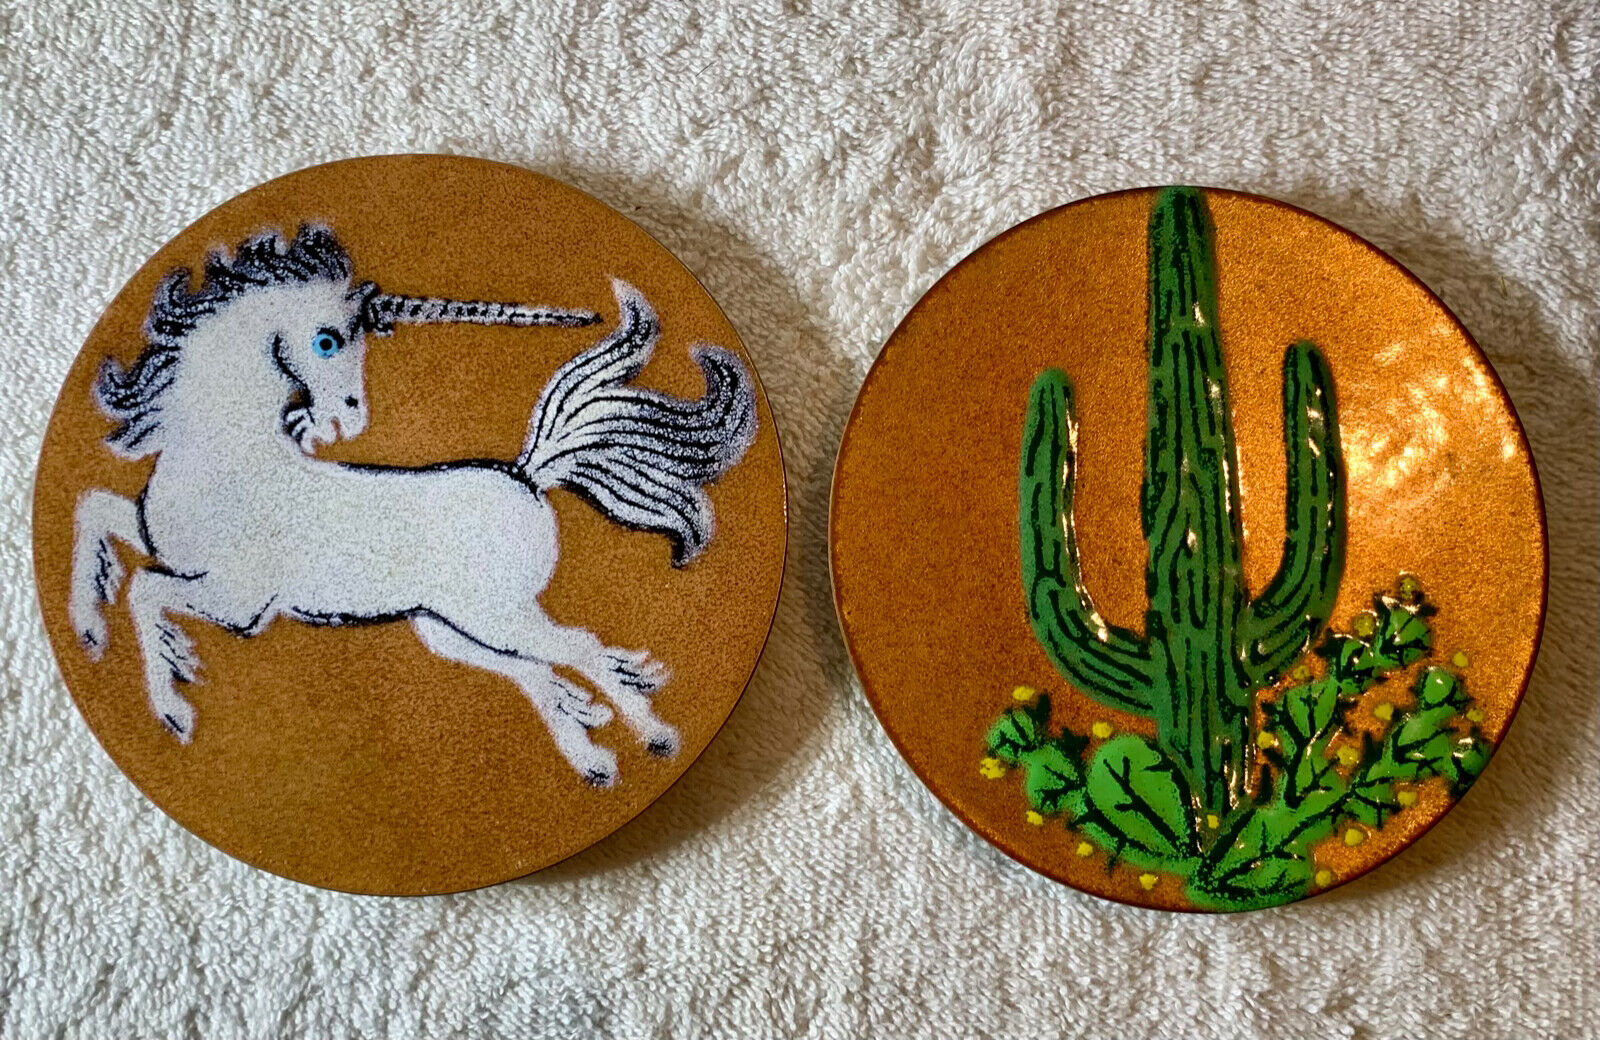 2 Annemarie Davidson Enamel On Copper Hand Crafted Unicorn & Cactus Plate 5